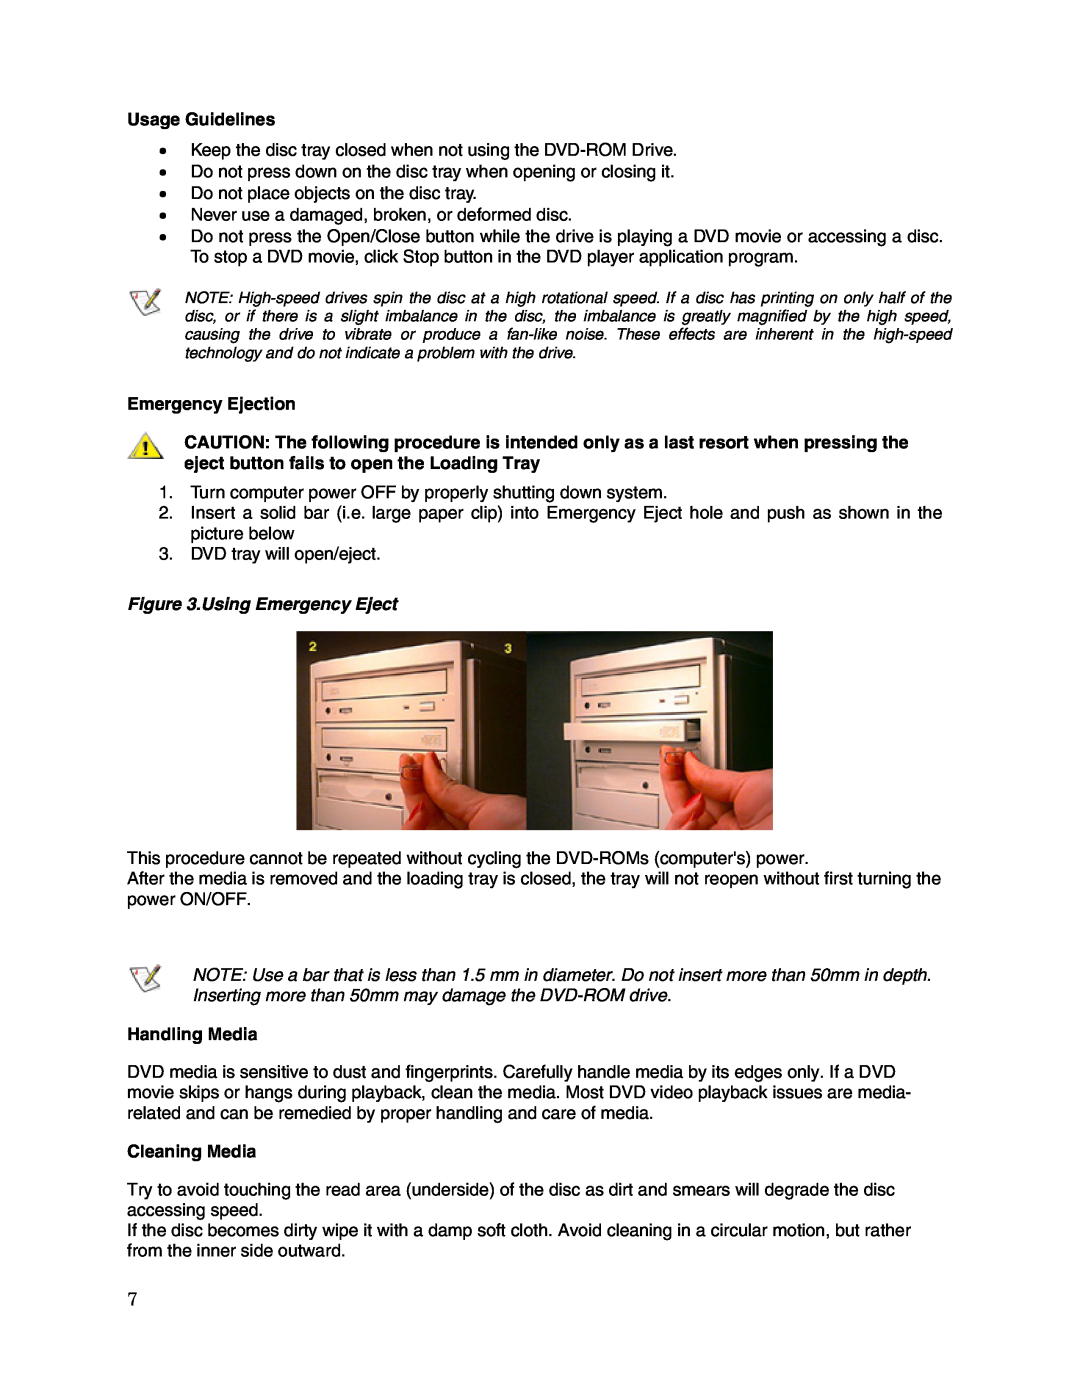 Toshiba SD-M1712 user manual Usage Guidelines, Emergency Ejection, Using Emergency Eject, Handling Media, Cleaning Media 